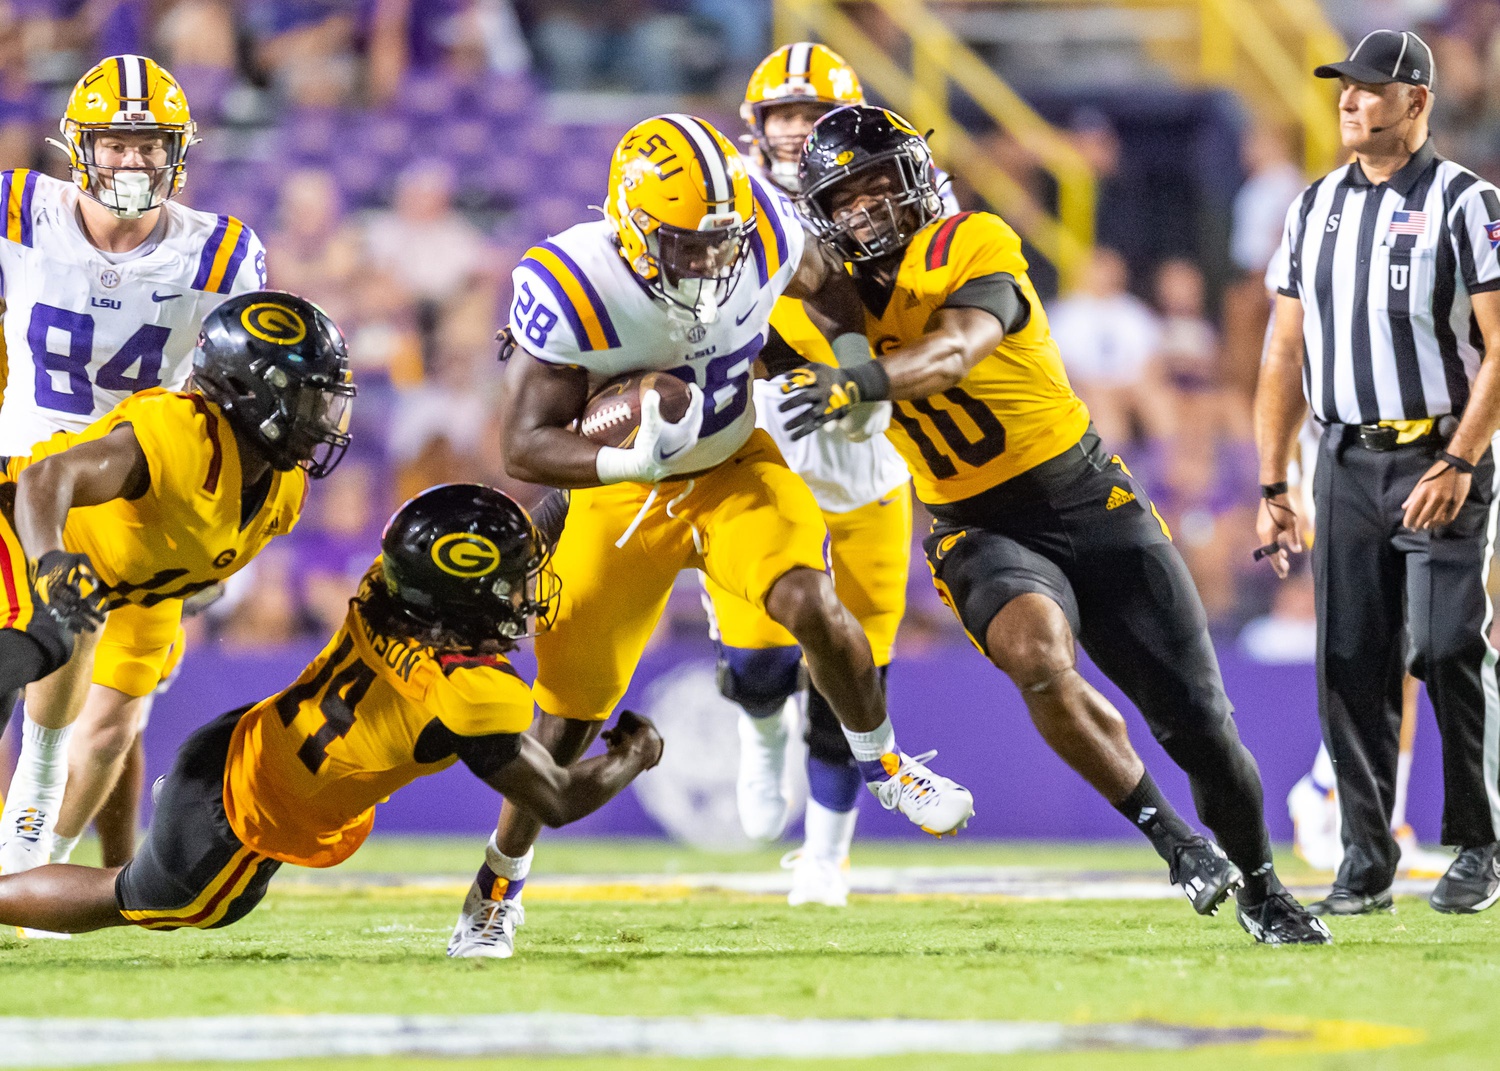 A look at three of the more important observations from an LSU win over Grambling that compelled more questions than answers.